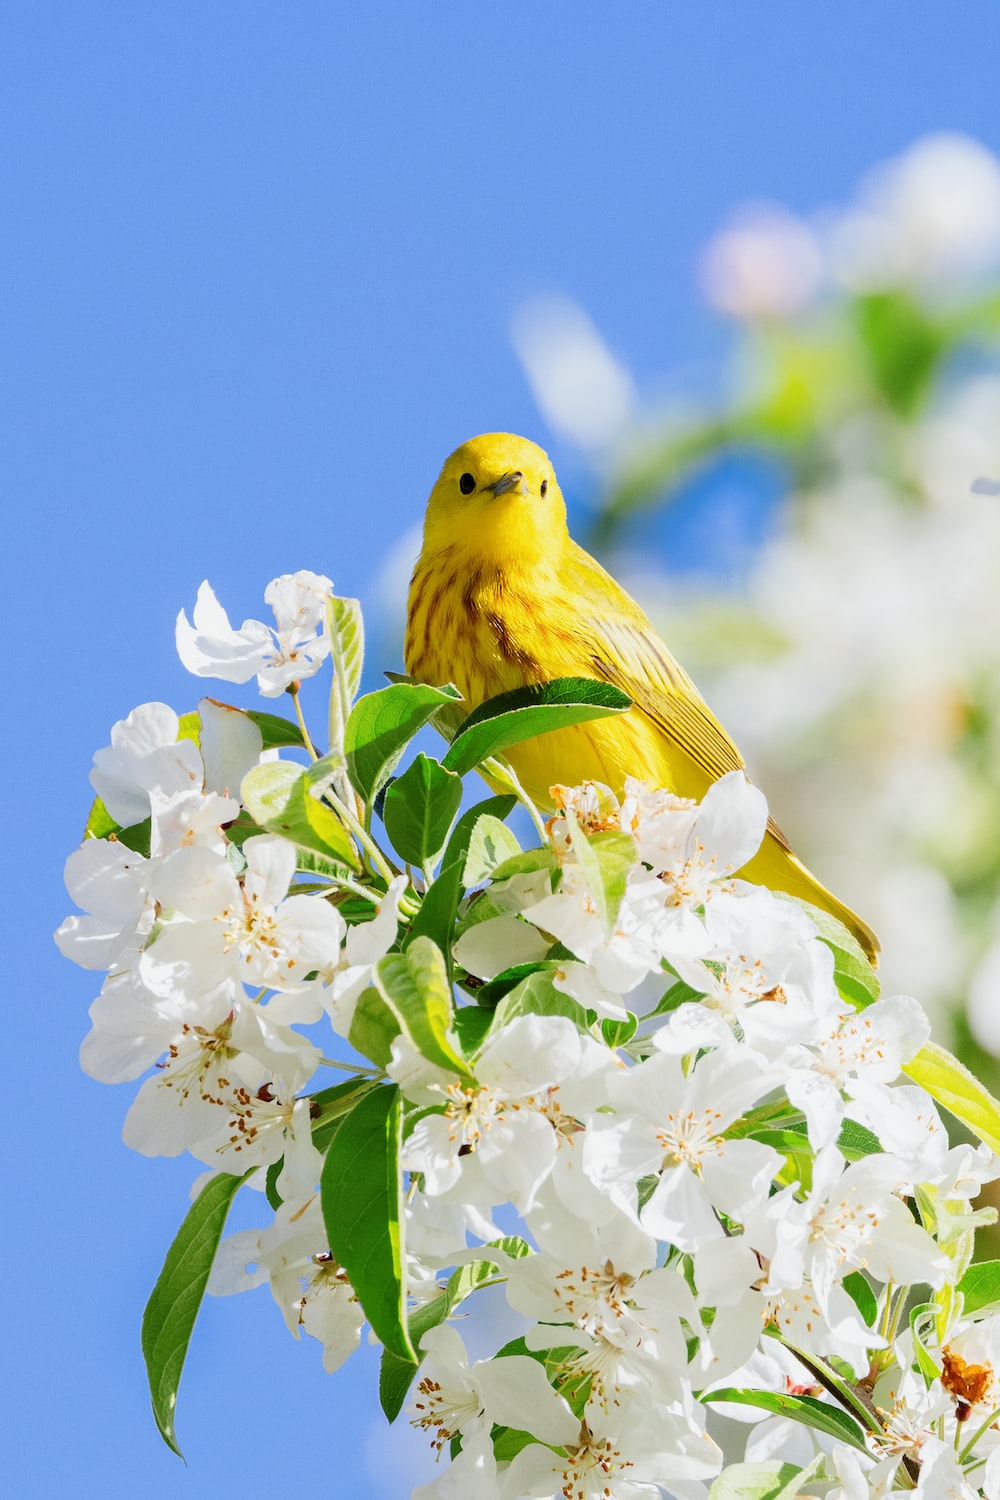 Canary pictures download free images on